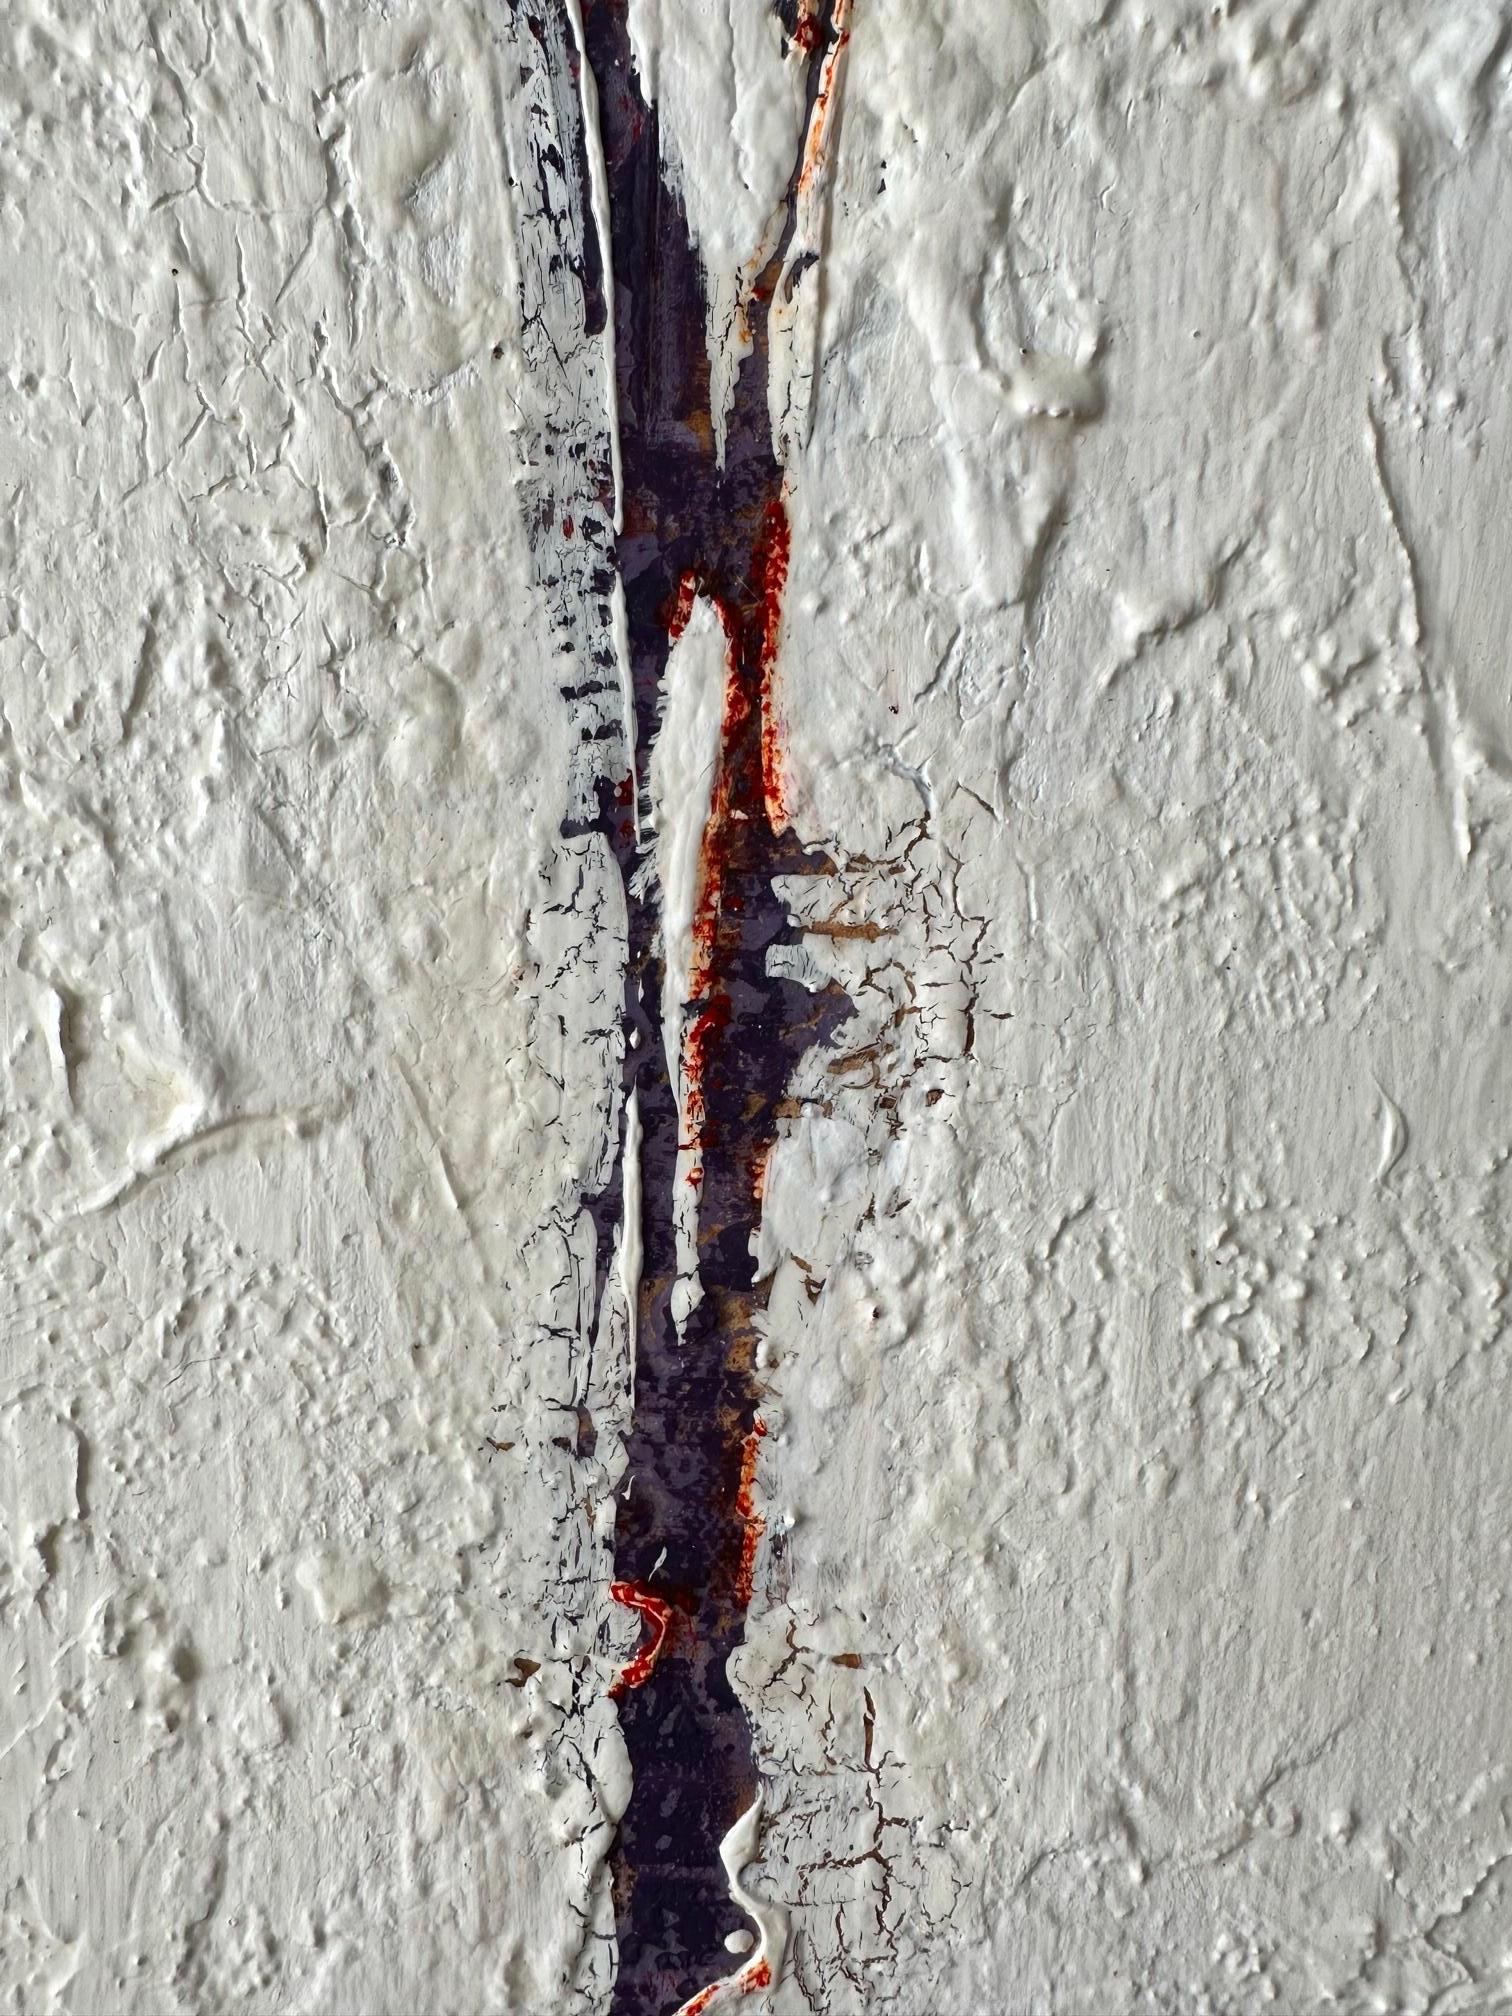 A unique figurative abstract of a couple made using vibrant white, purple and tan to create a bold original modern work of art. There is a unique range of expressionistic strokes, textures and text incorporated in this Contemporary painting by